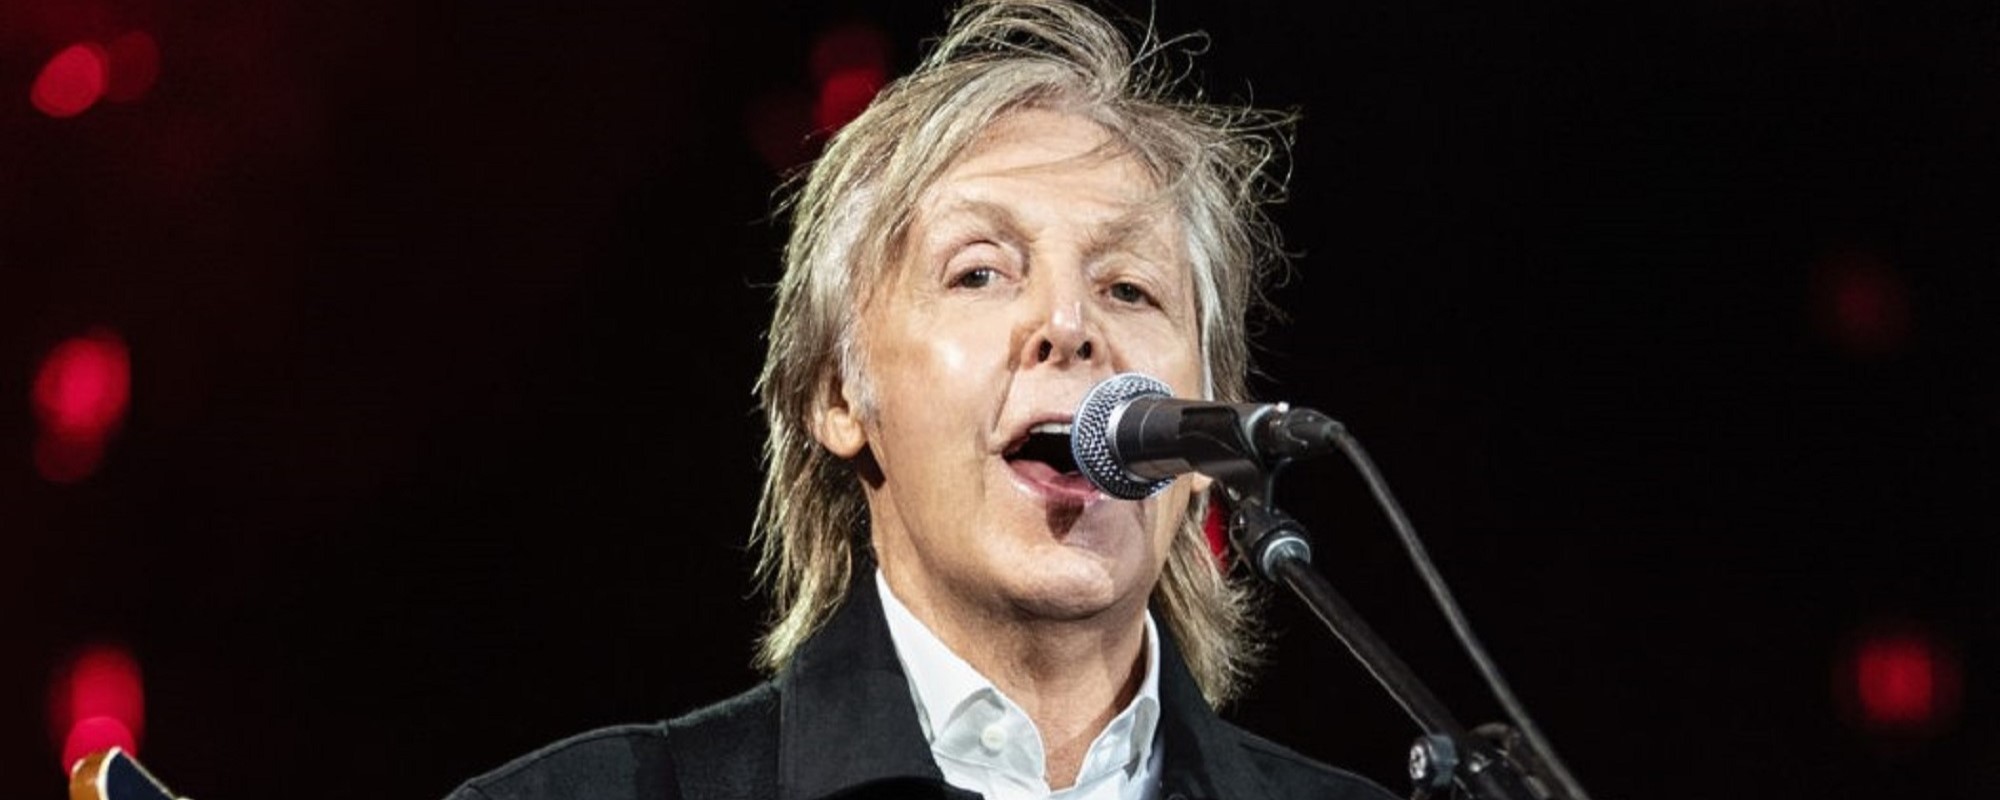 Paul McCartney Reveals the Famous Rock Artist Who Inspired Him to Write the Beatles Classic “Helter Skelter”